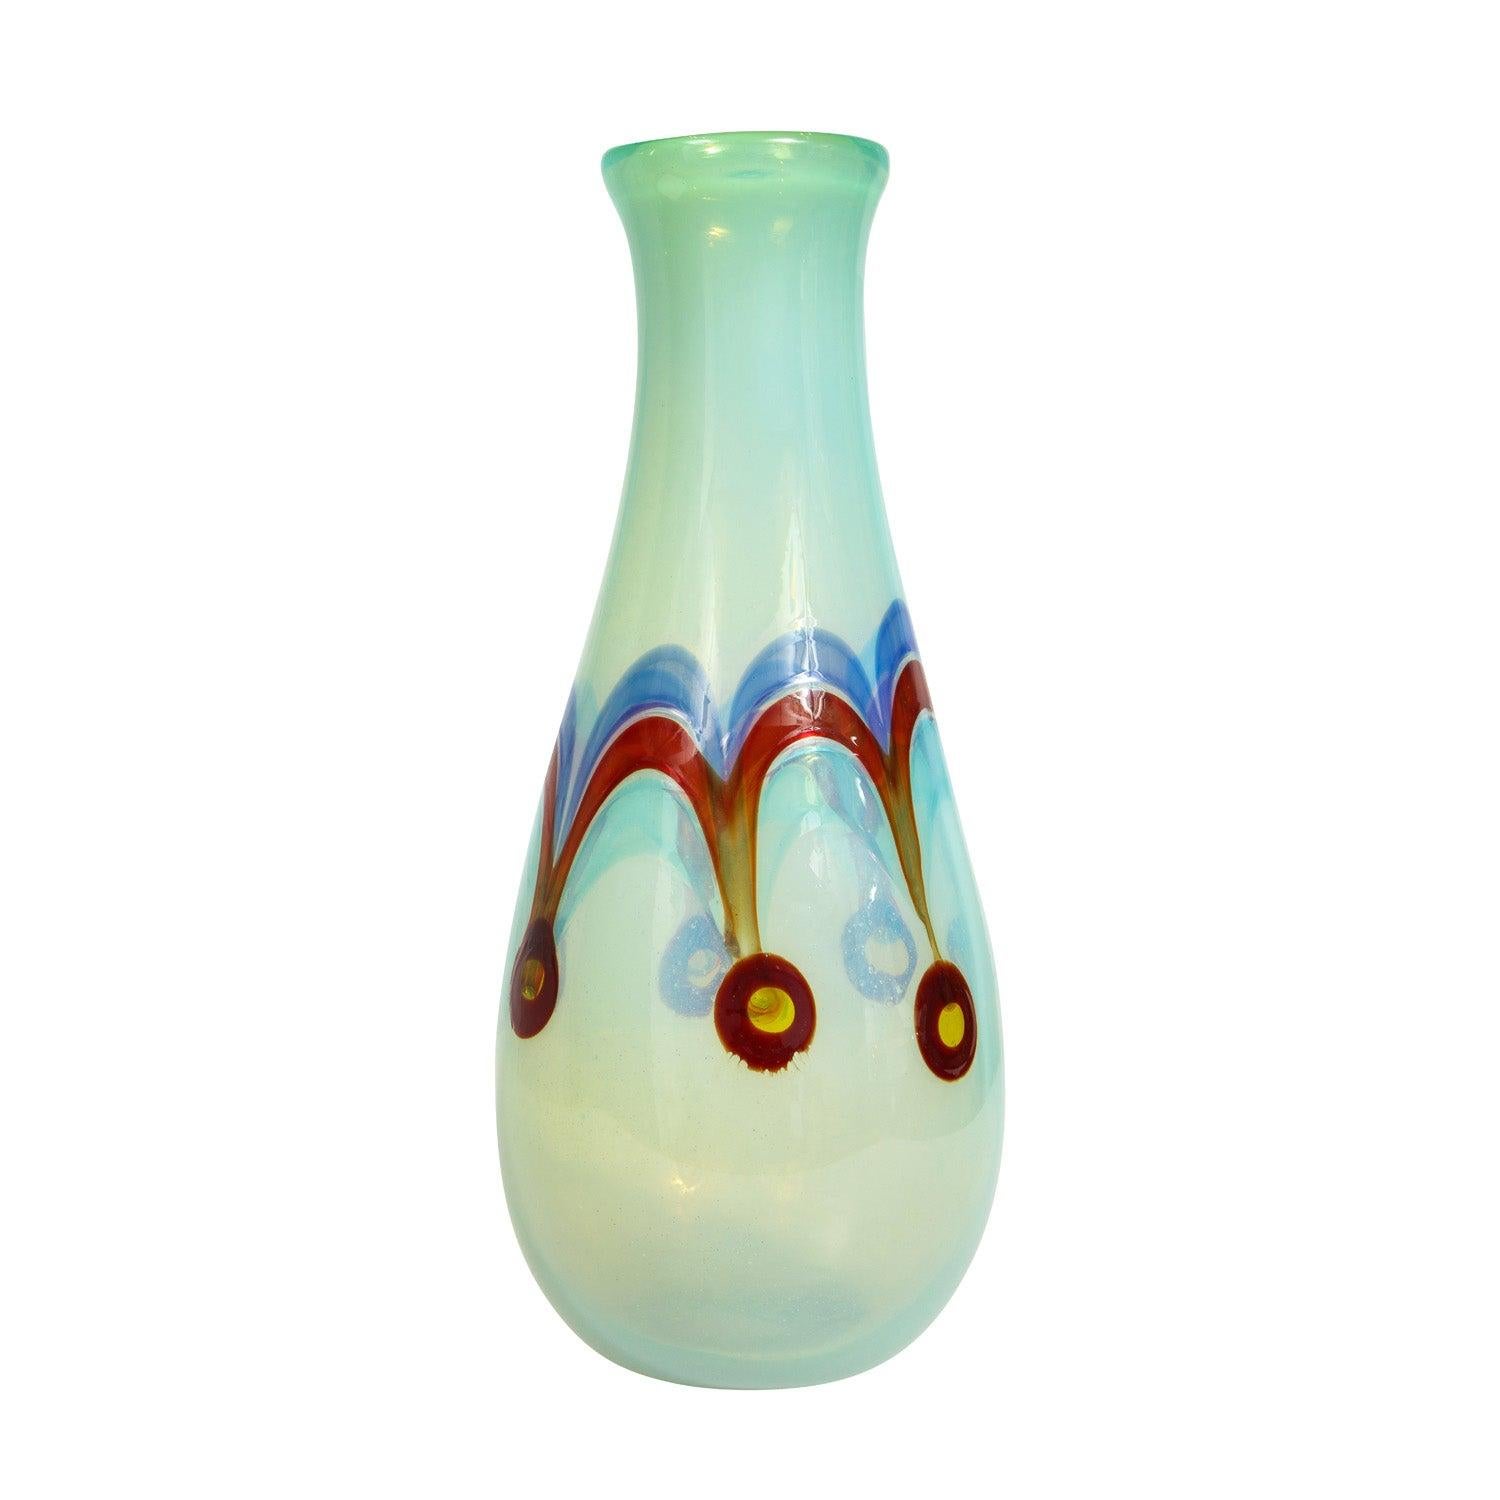 Anzolo Fuga Large Opalescent Pavone Vase, Italy, 1957-60